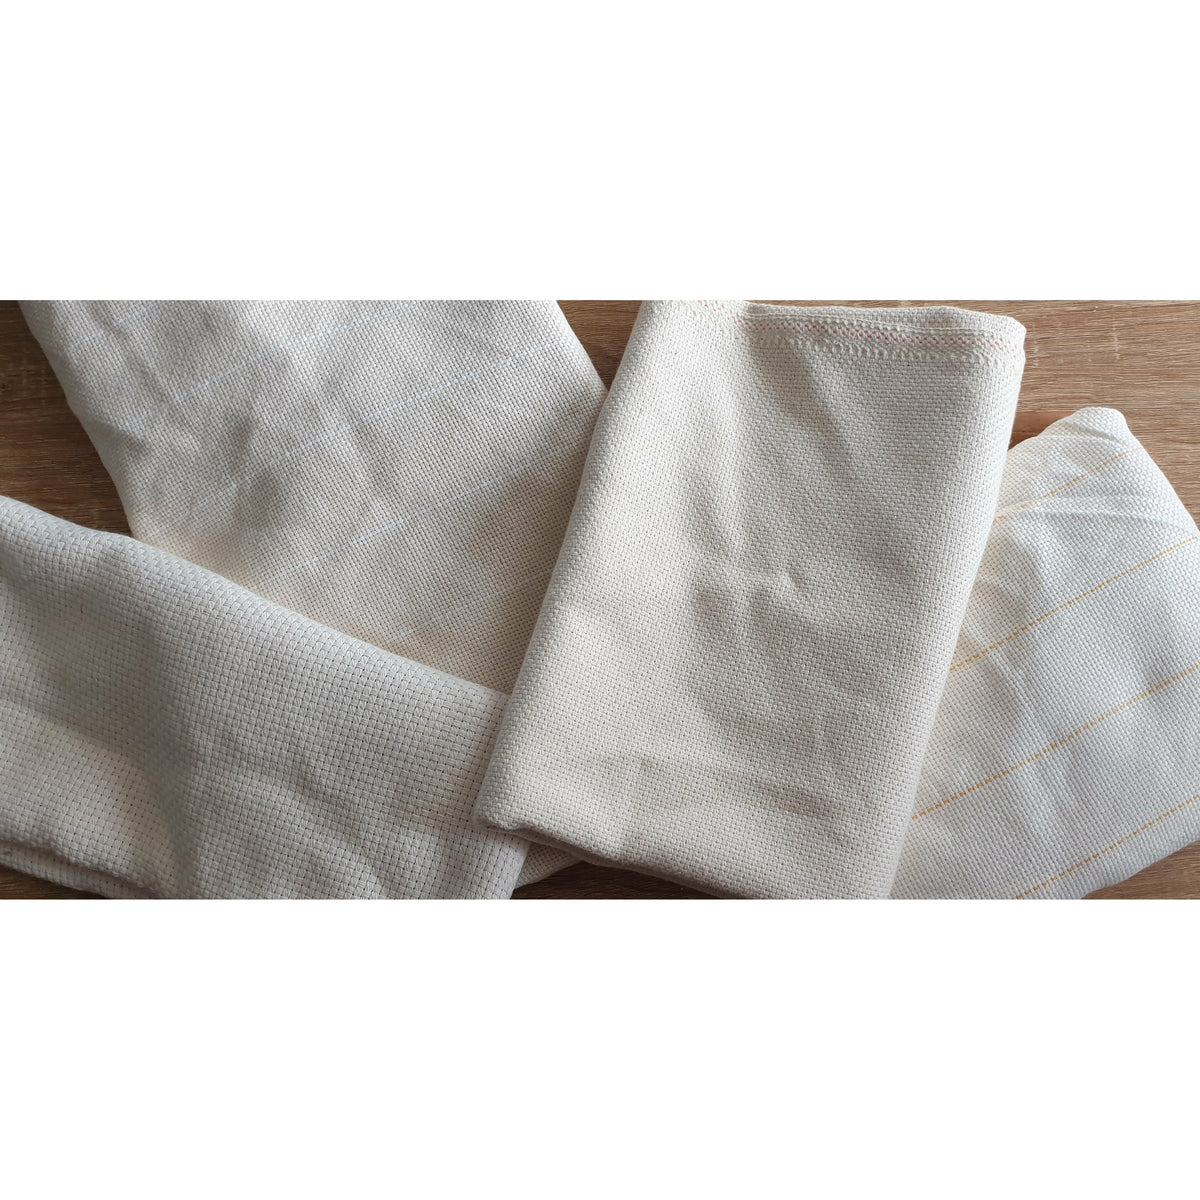 Monks Cloth with White Guidelines in Multiple Sizes - Available Now! - Punch Needle Supplies NZ